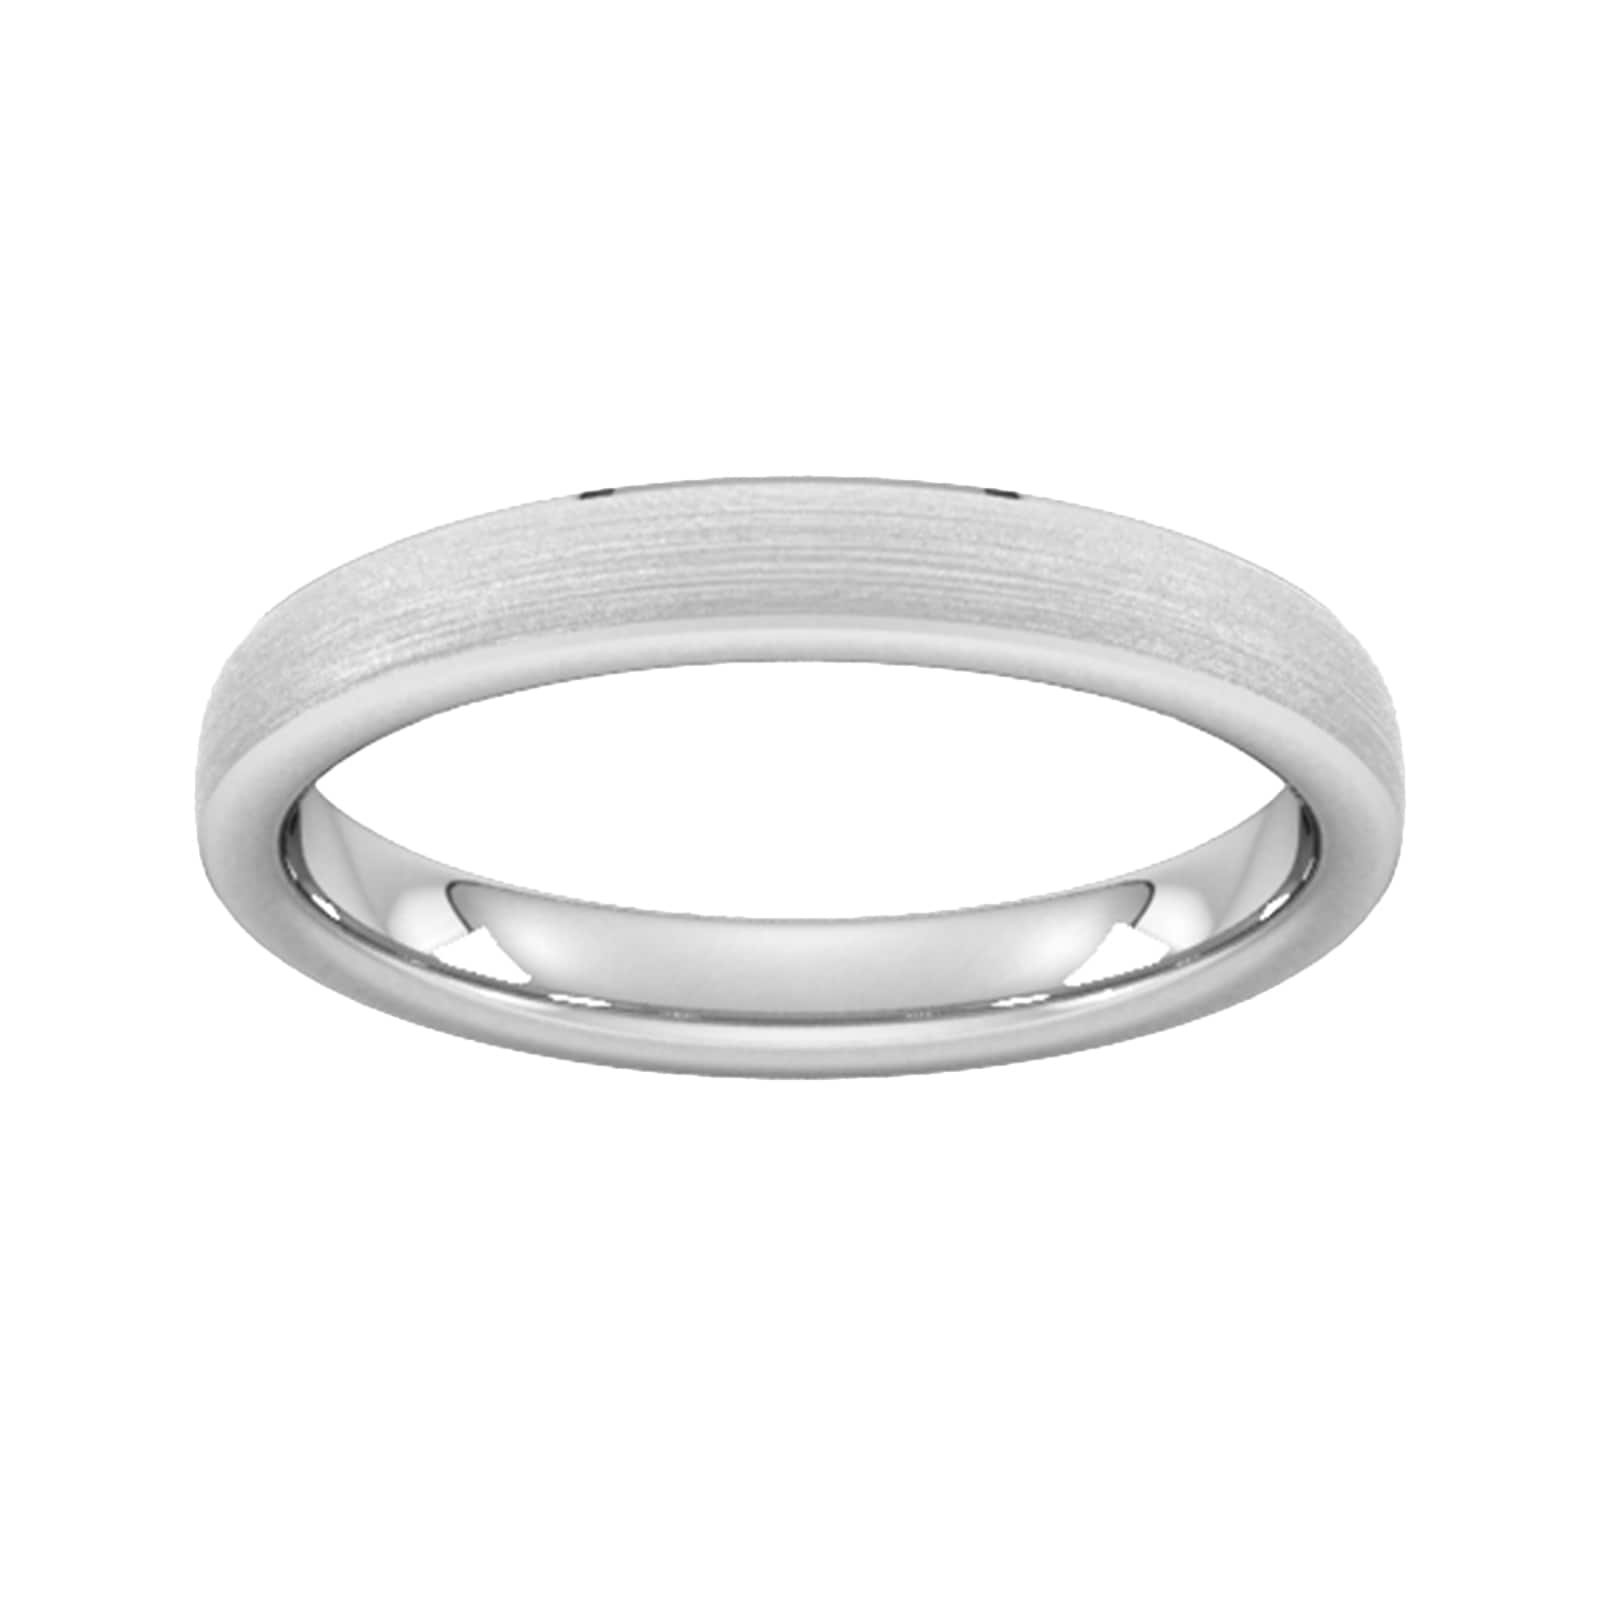 3mm D Shape Standard Polished Chamfered Edges With Matt Centre Wedding Ring In 950 Palladium - Ring Size M